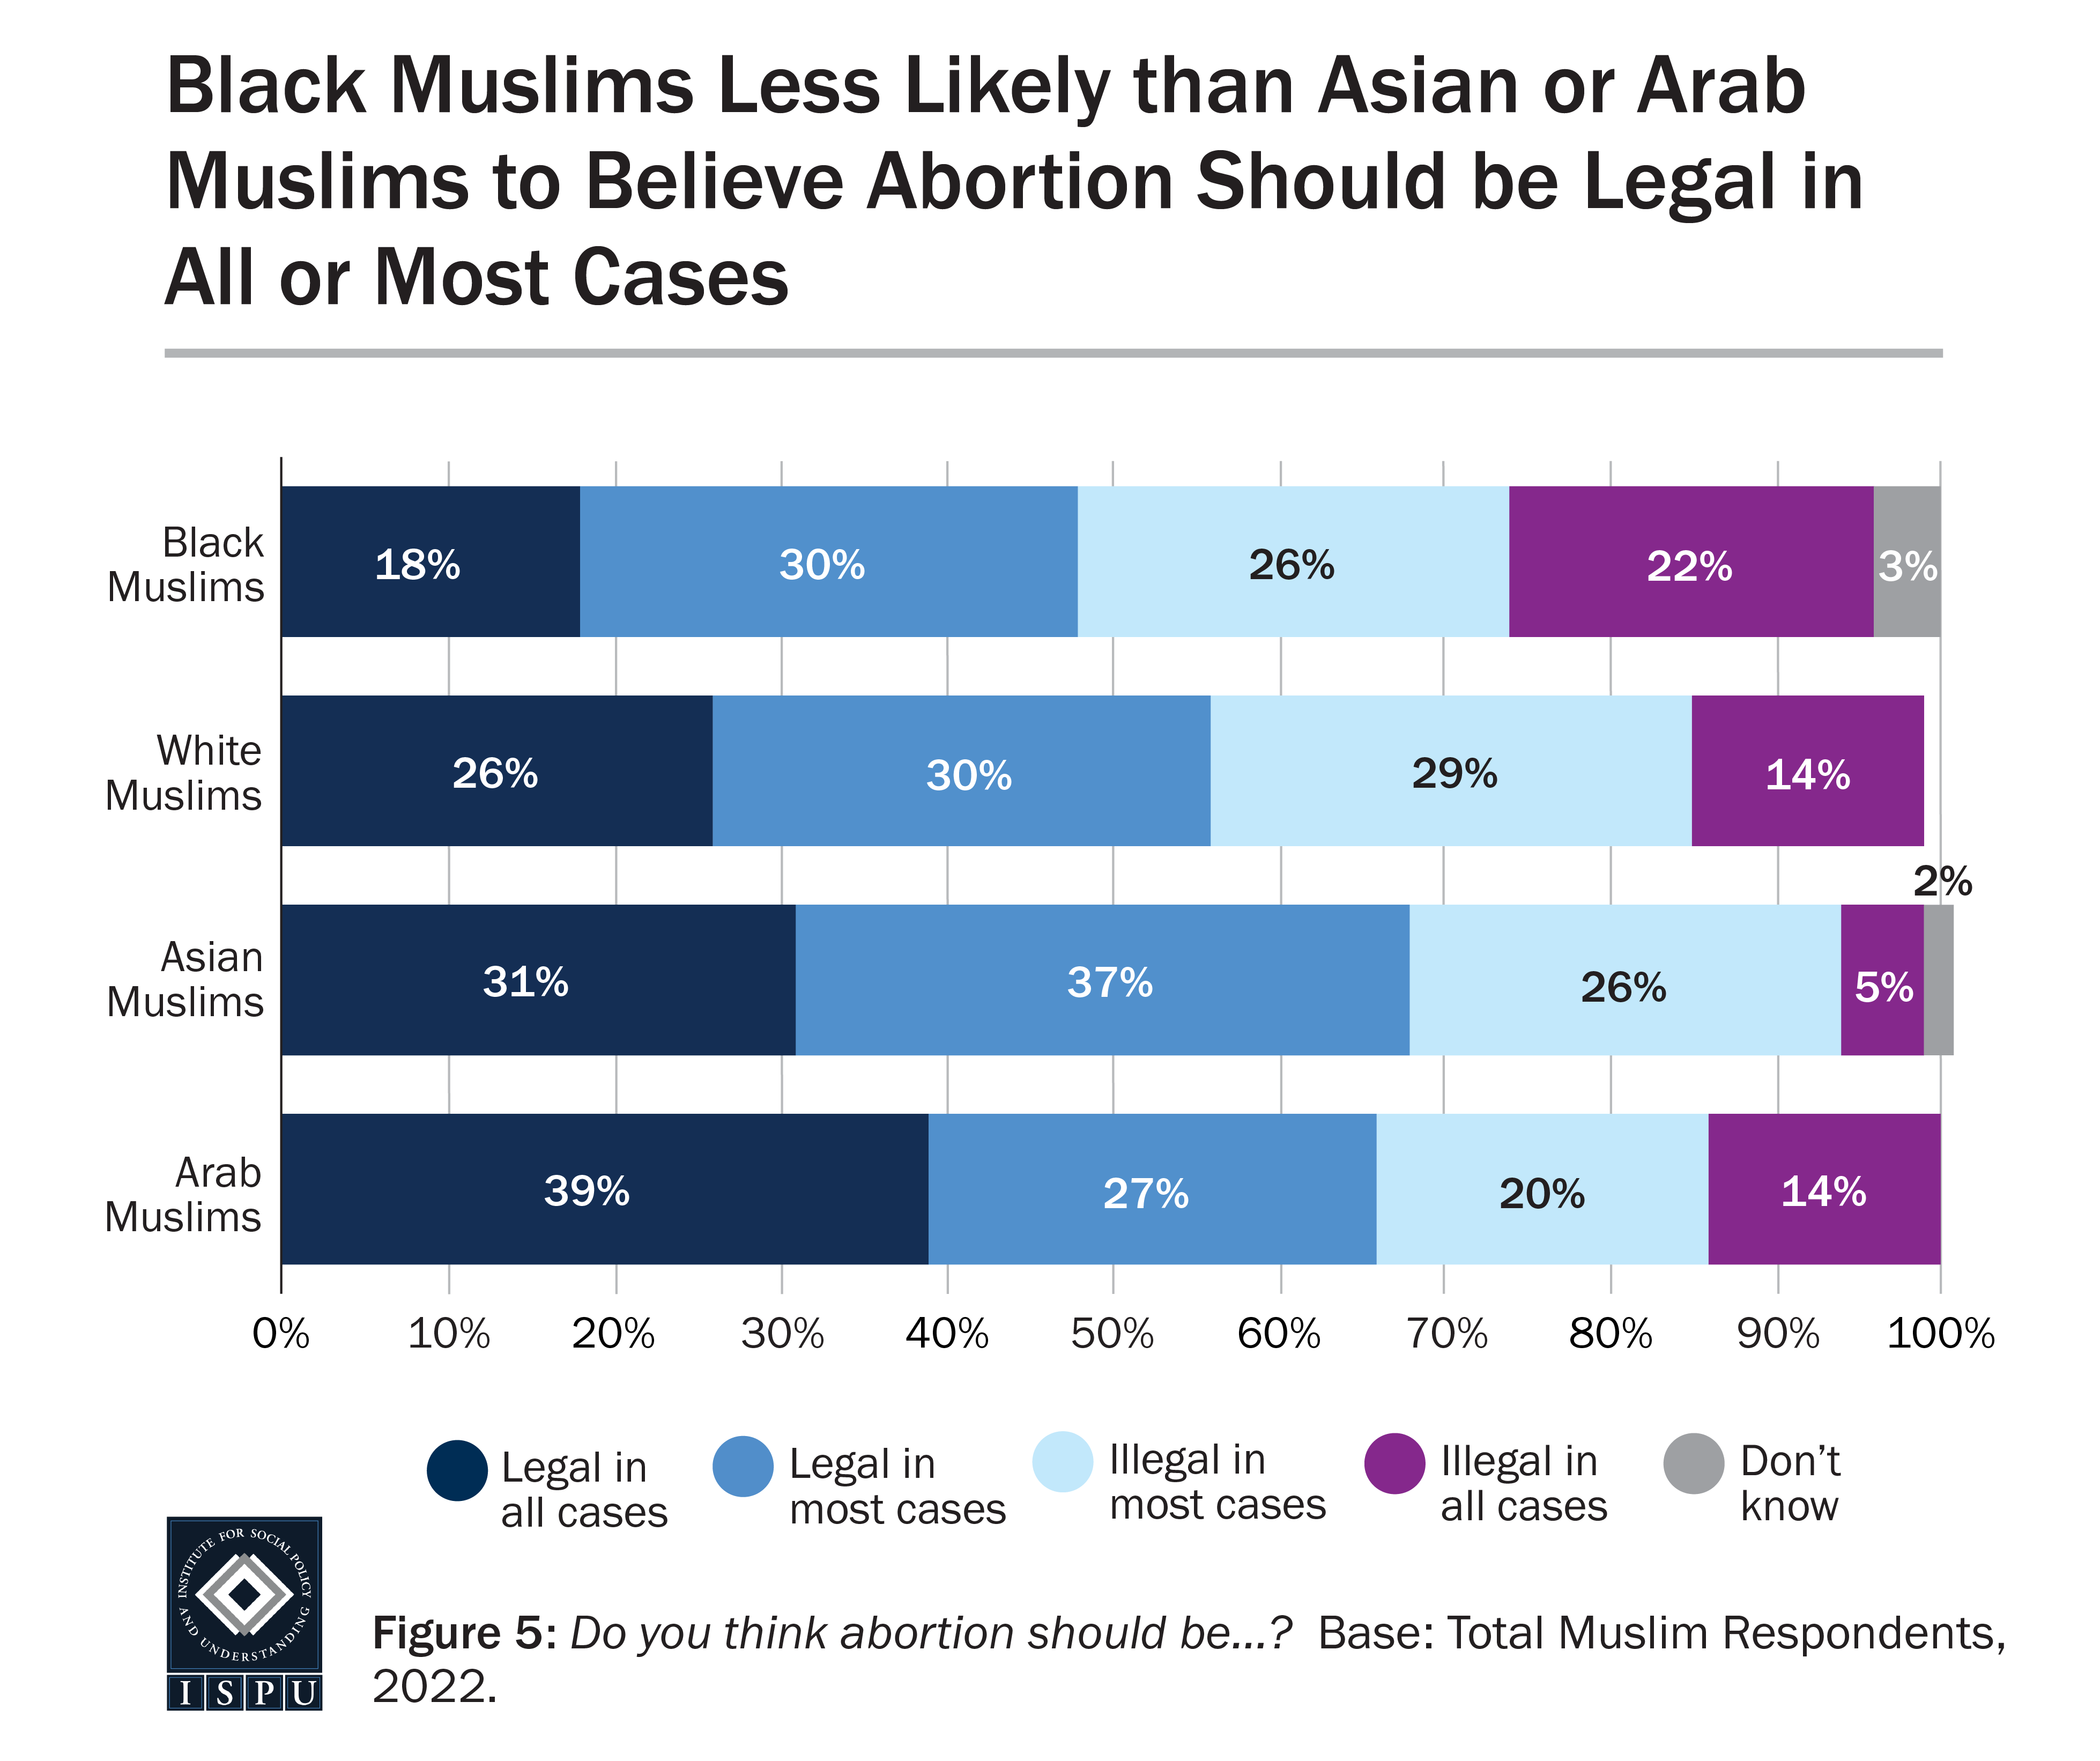 Graph displaying: At 18% and 30% respectively, Black Muslims are less likely to believe abortion should be legal in all or most cases than Arab or Asian Muslims.